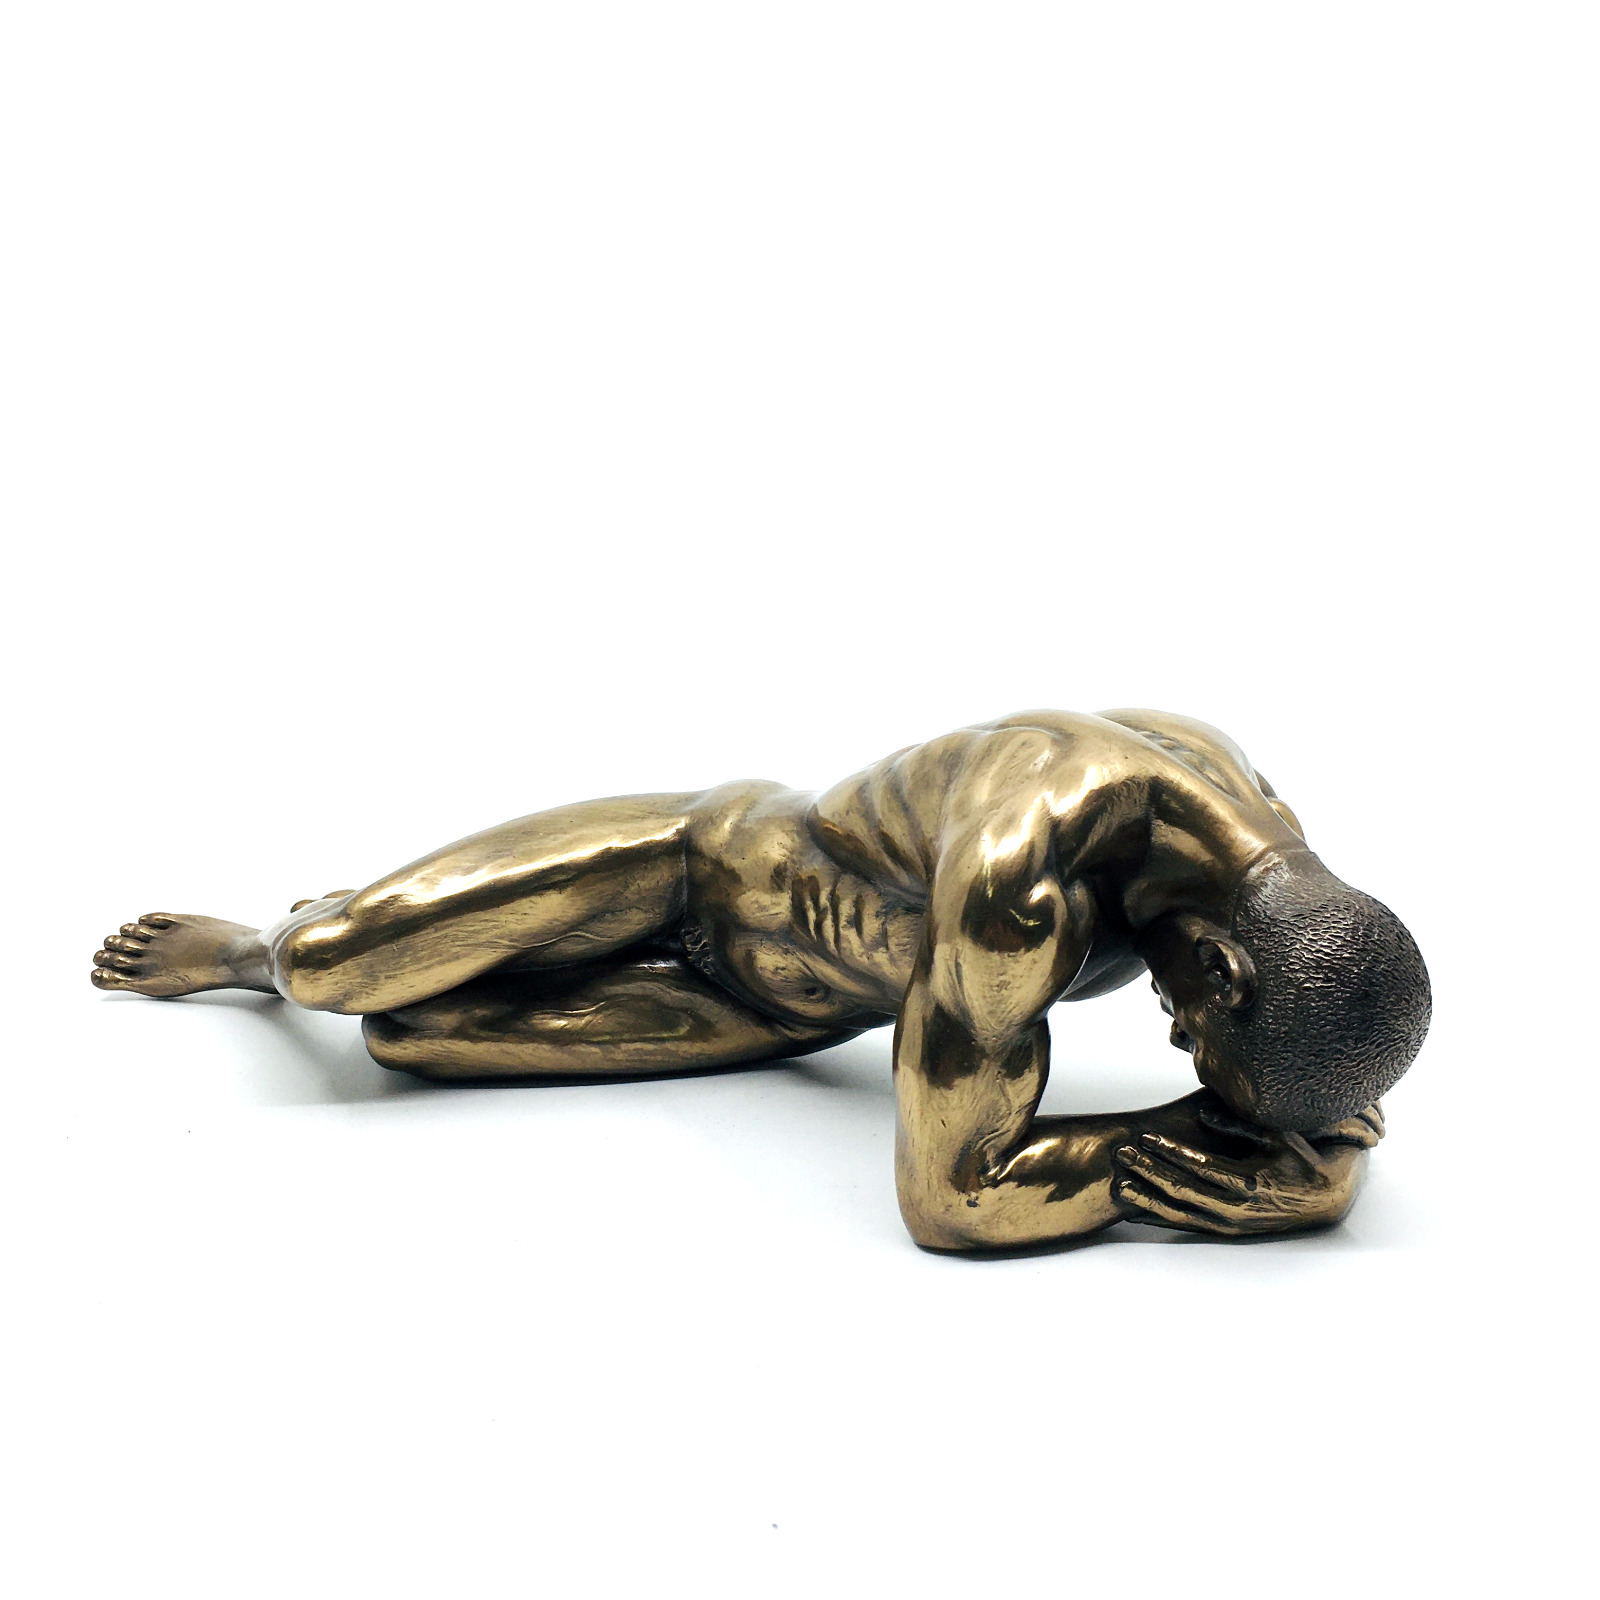 Muscular Naked Male Figurine Lying Facedown on the Ground